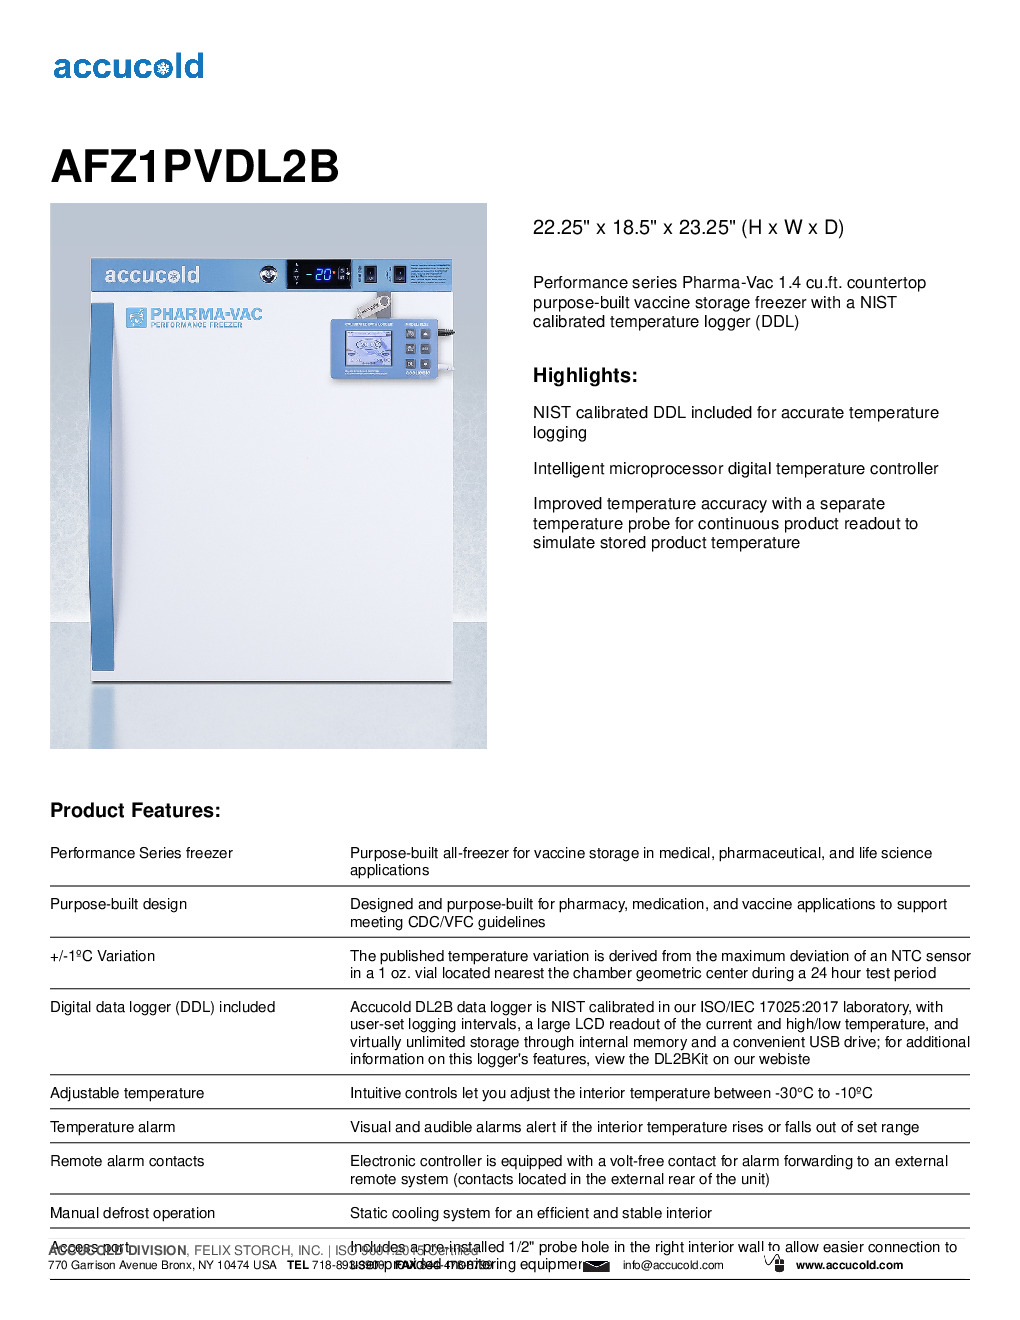 Accucold AFZ1PVDL2B Medical Freezer